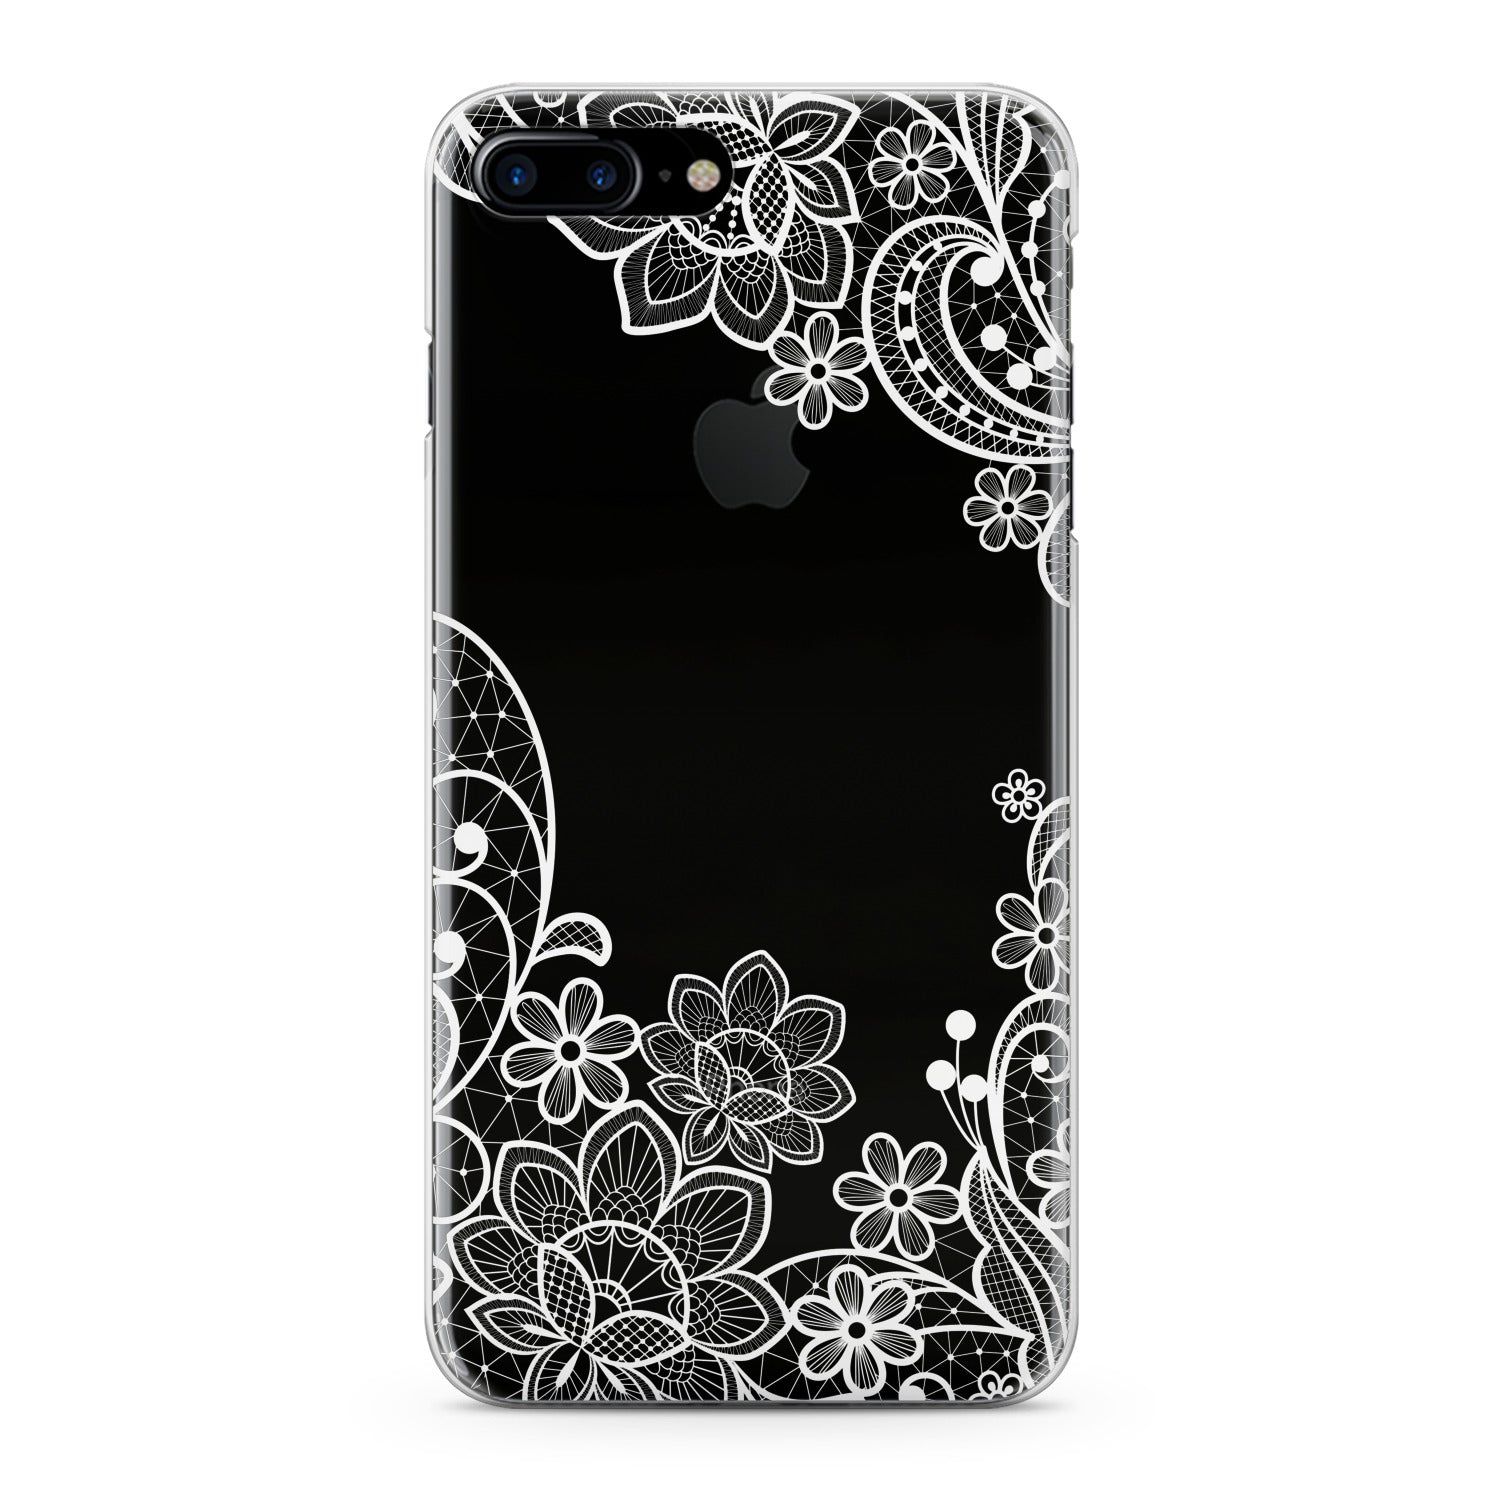 Lex Altern Lace Print Phone Case for your iPhone & Android phone.